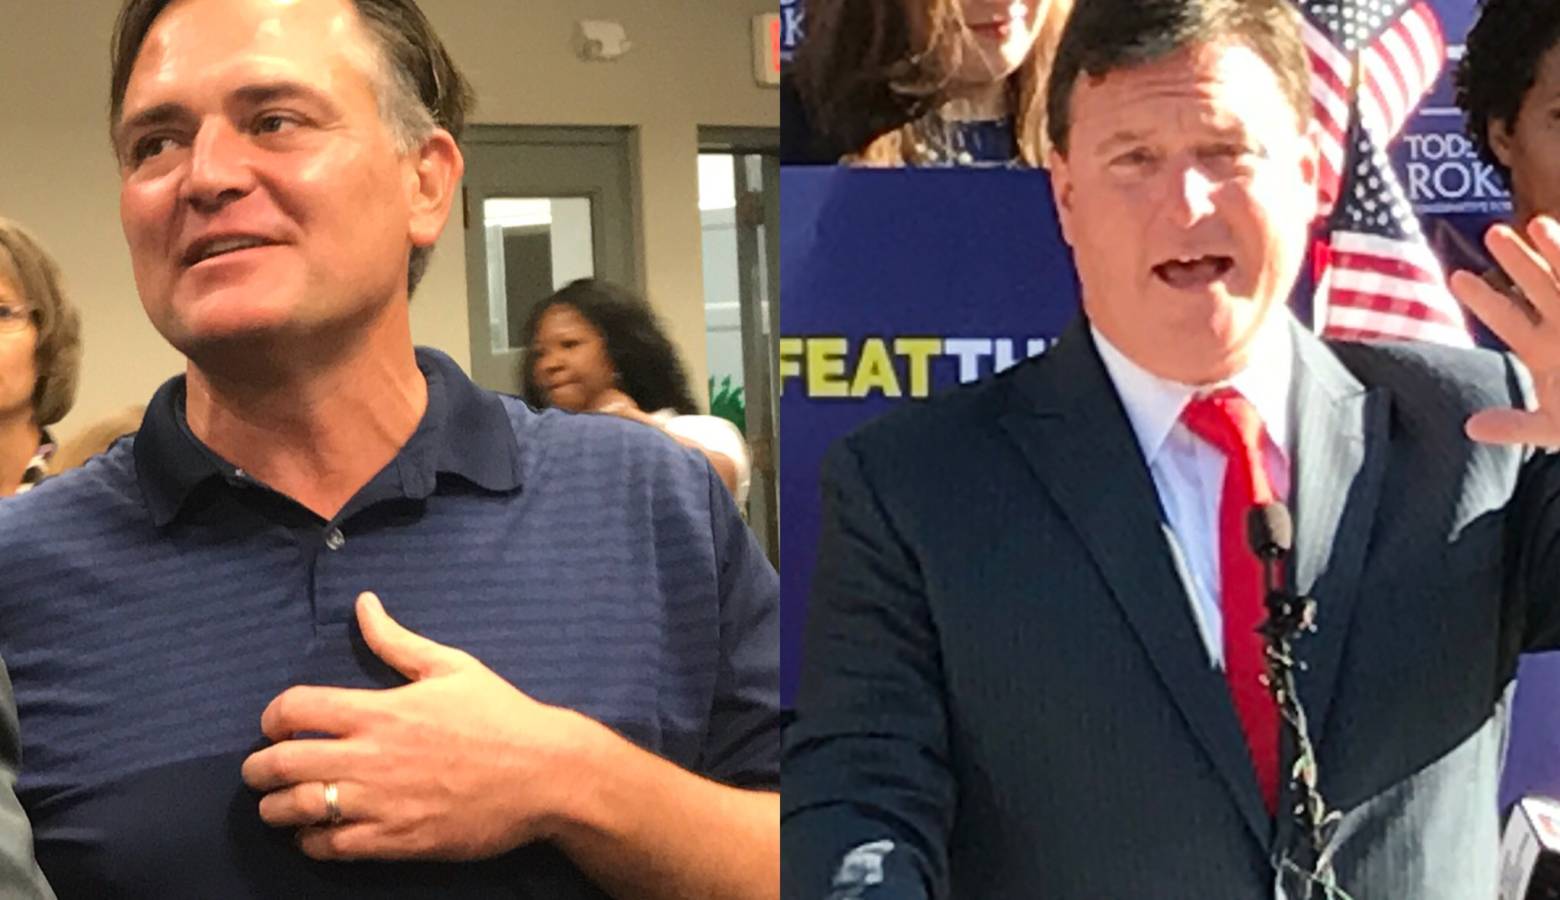 The tone of the race to challenge incumbent U.S. Sen. Joe Donnelly (D-Ind.) has been marked by vitriol between U.S. Rep. Luke Messer (R-Shelbyville), left, and U.S. Rep. Todd Rokita (R-Brownsburg), right. (Brandon Smith/IPB News)